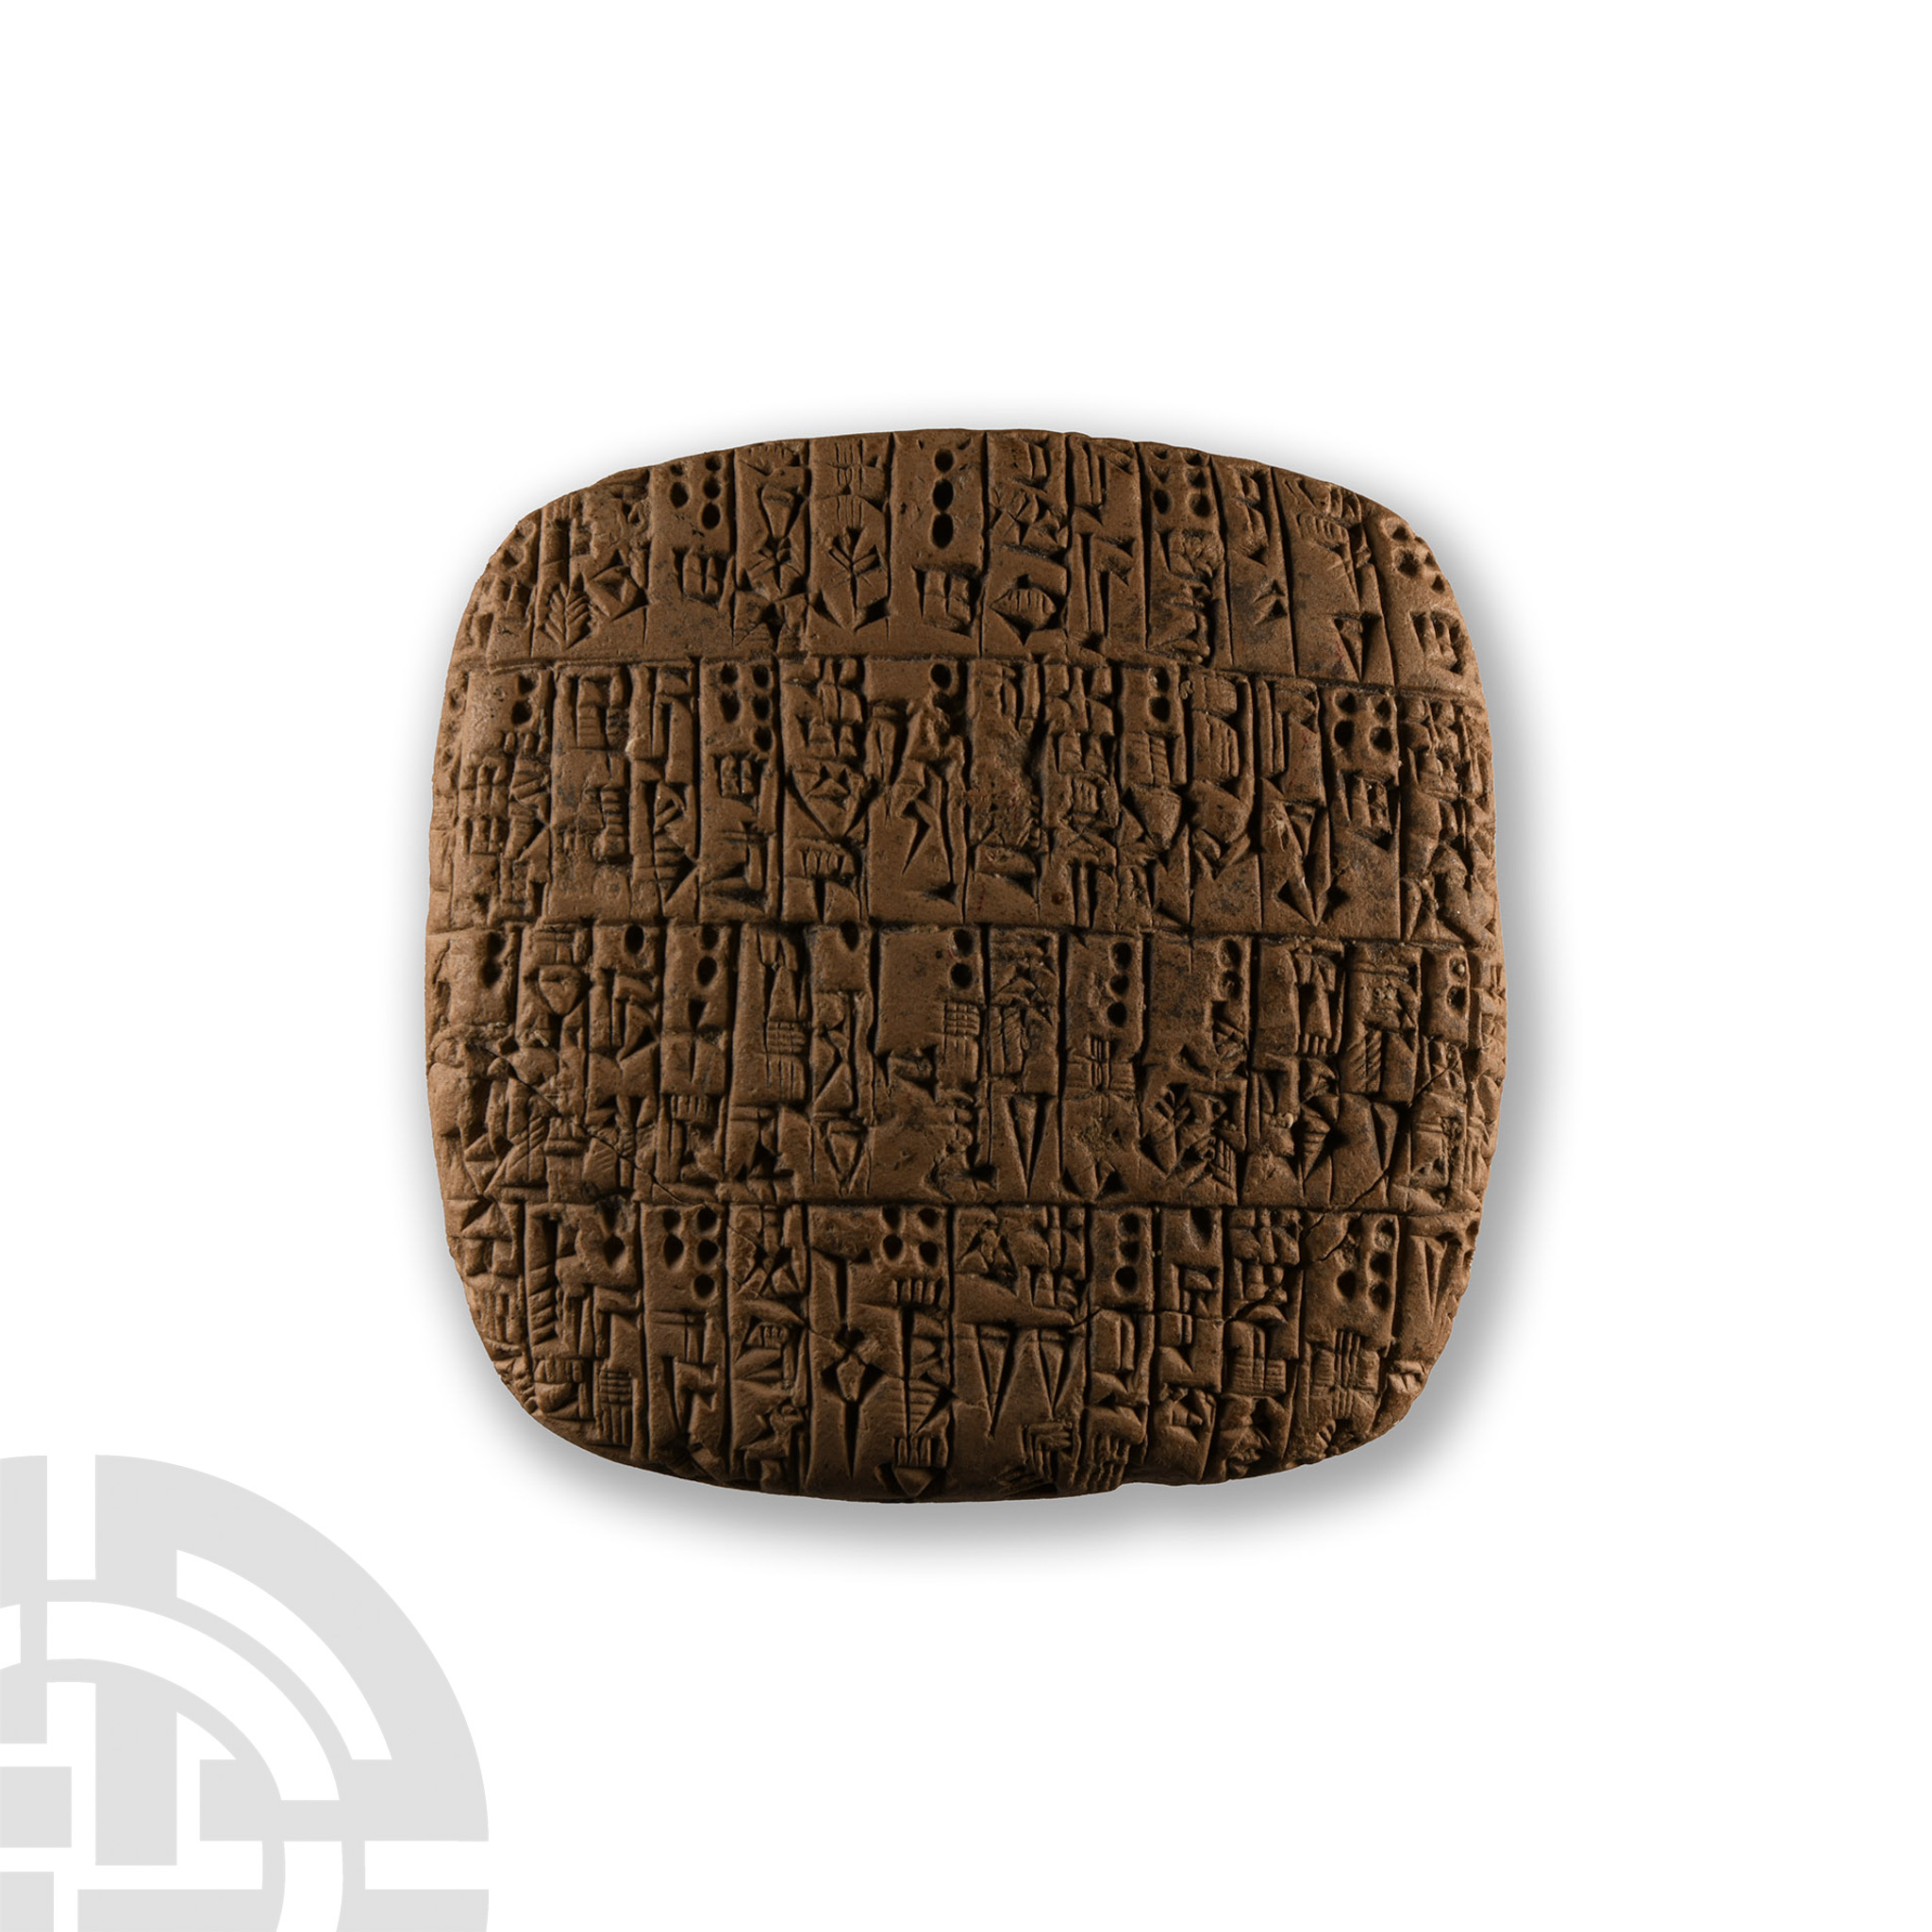 Early Dynastic Terracotta Cuneiform Administrative Tablet Recording Livestock and their Owners - Image 2 of 2